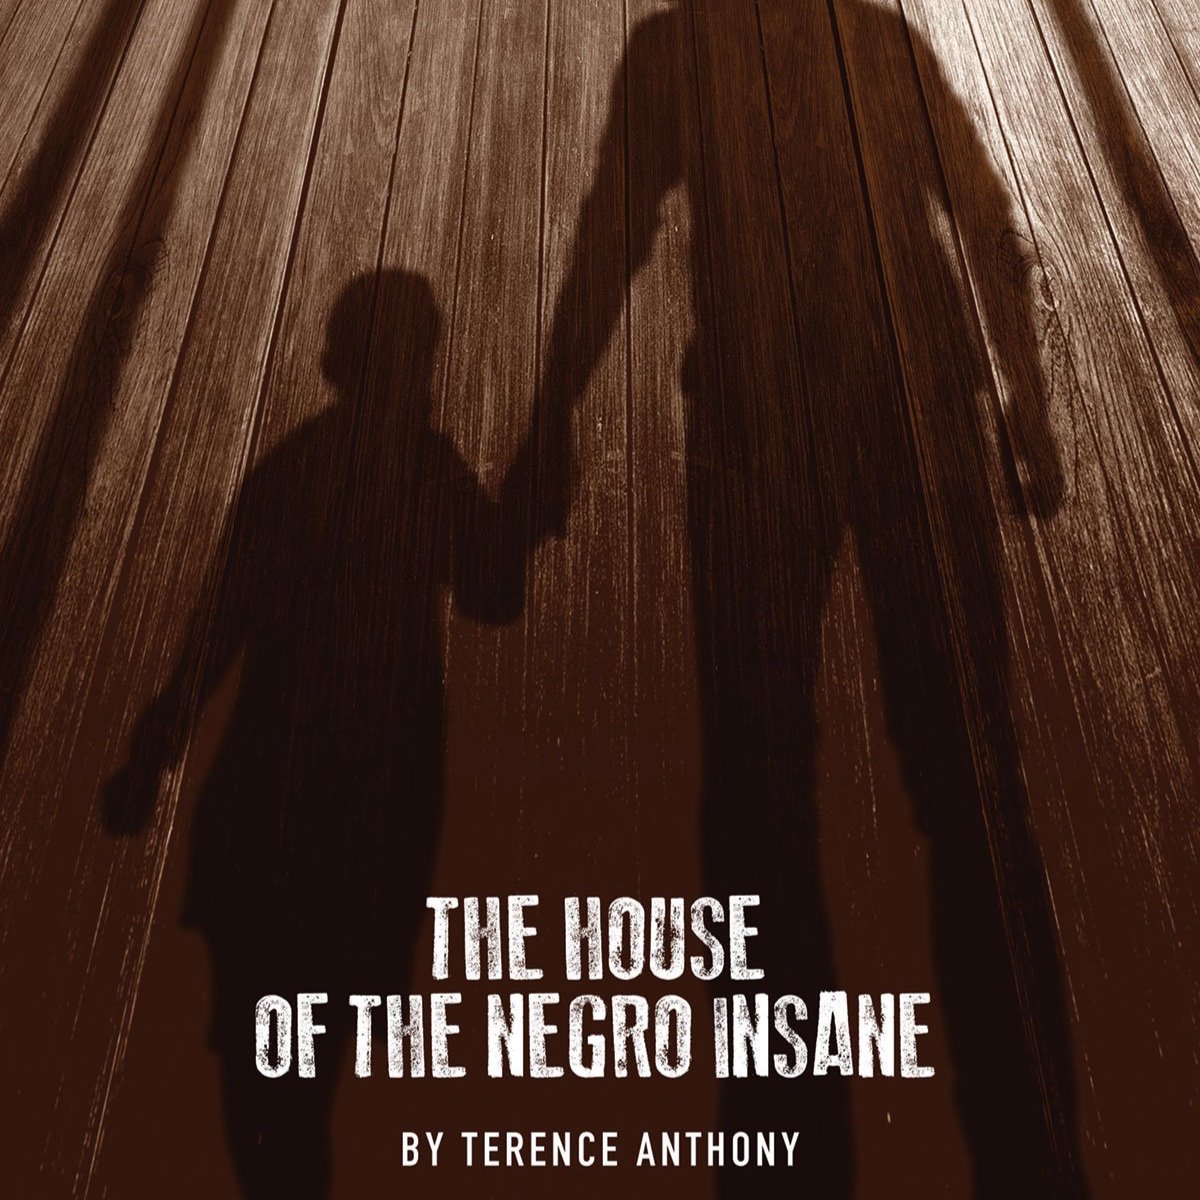 The House of the Negro Insane